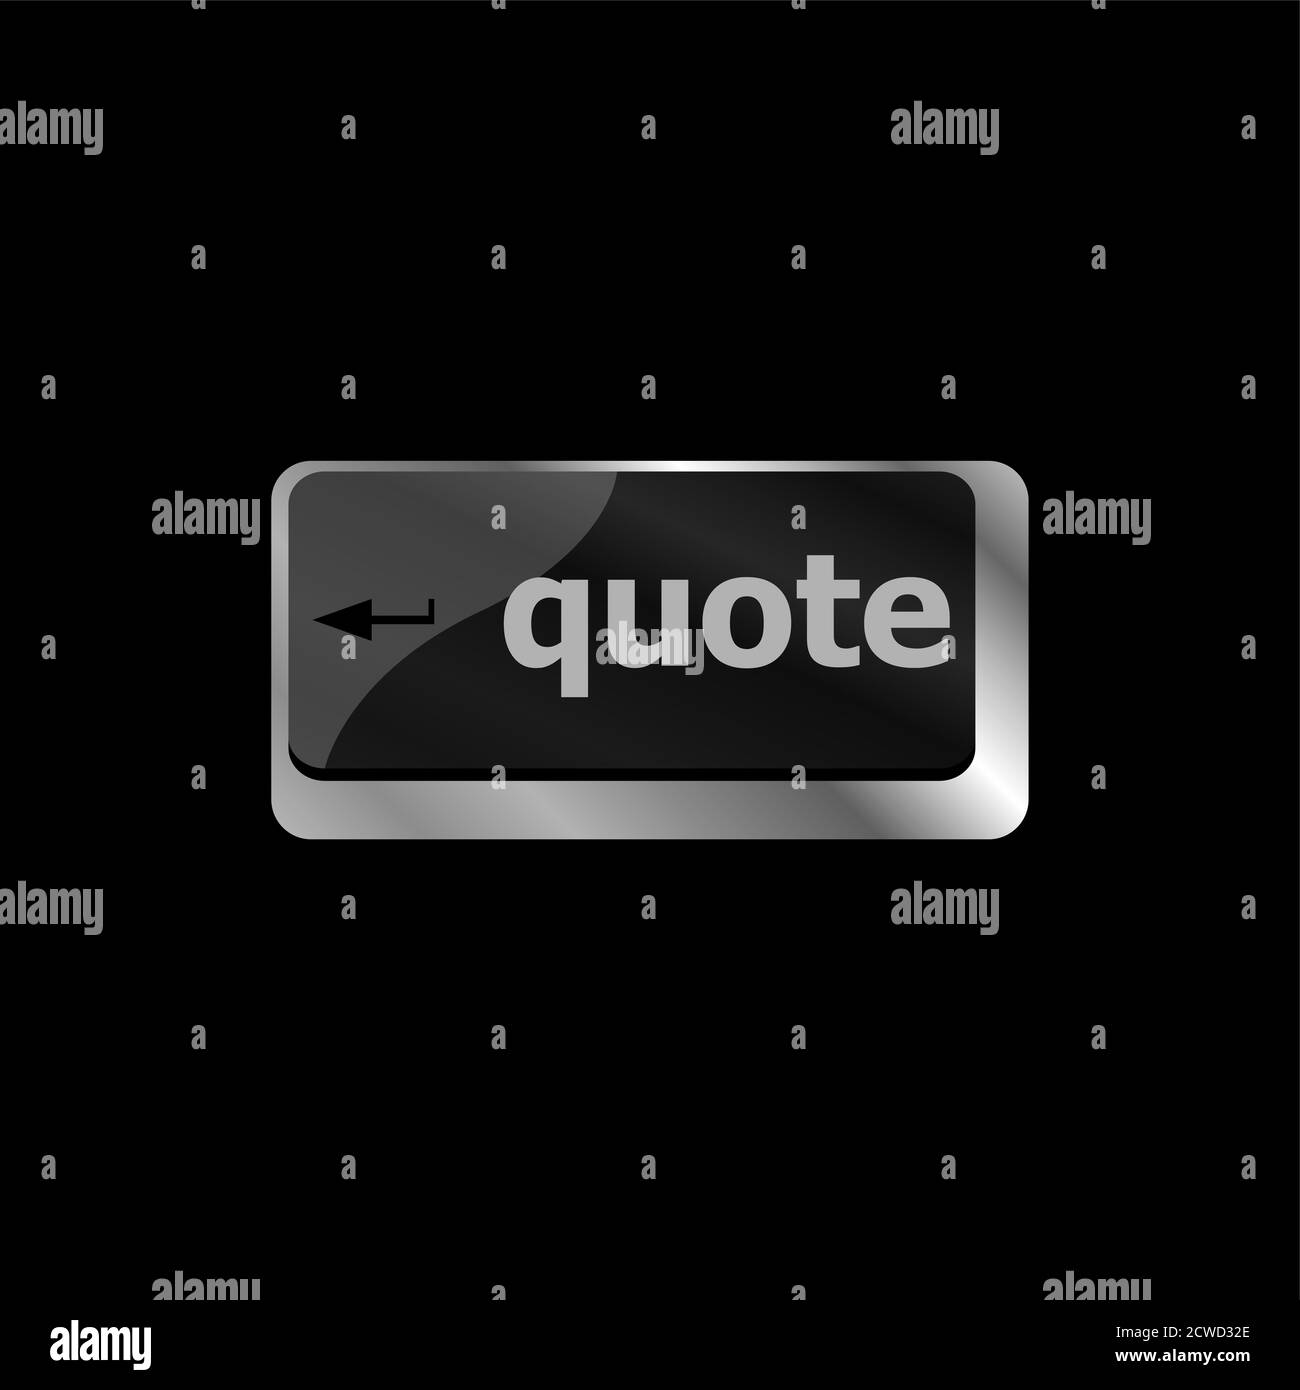 quote word on computer keyboard keys button Stock Photo